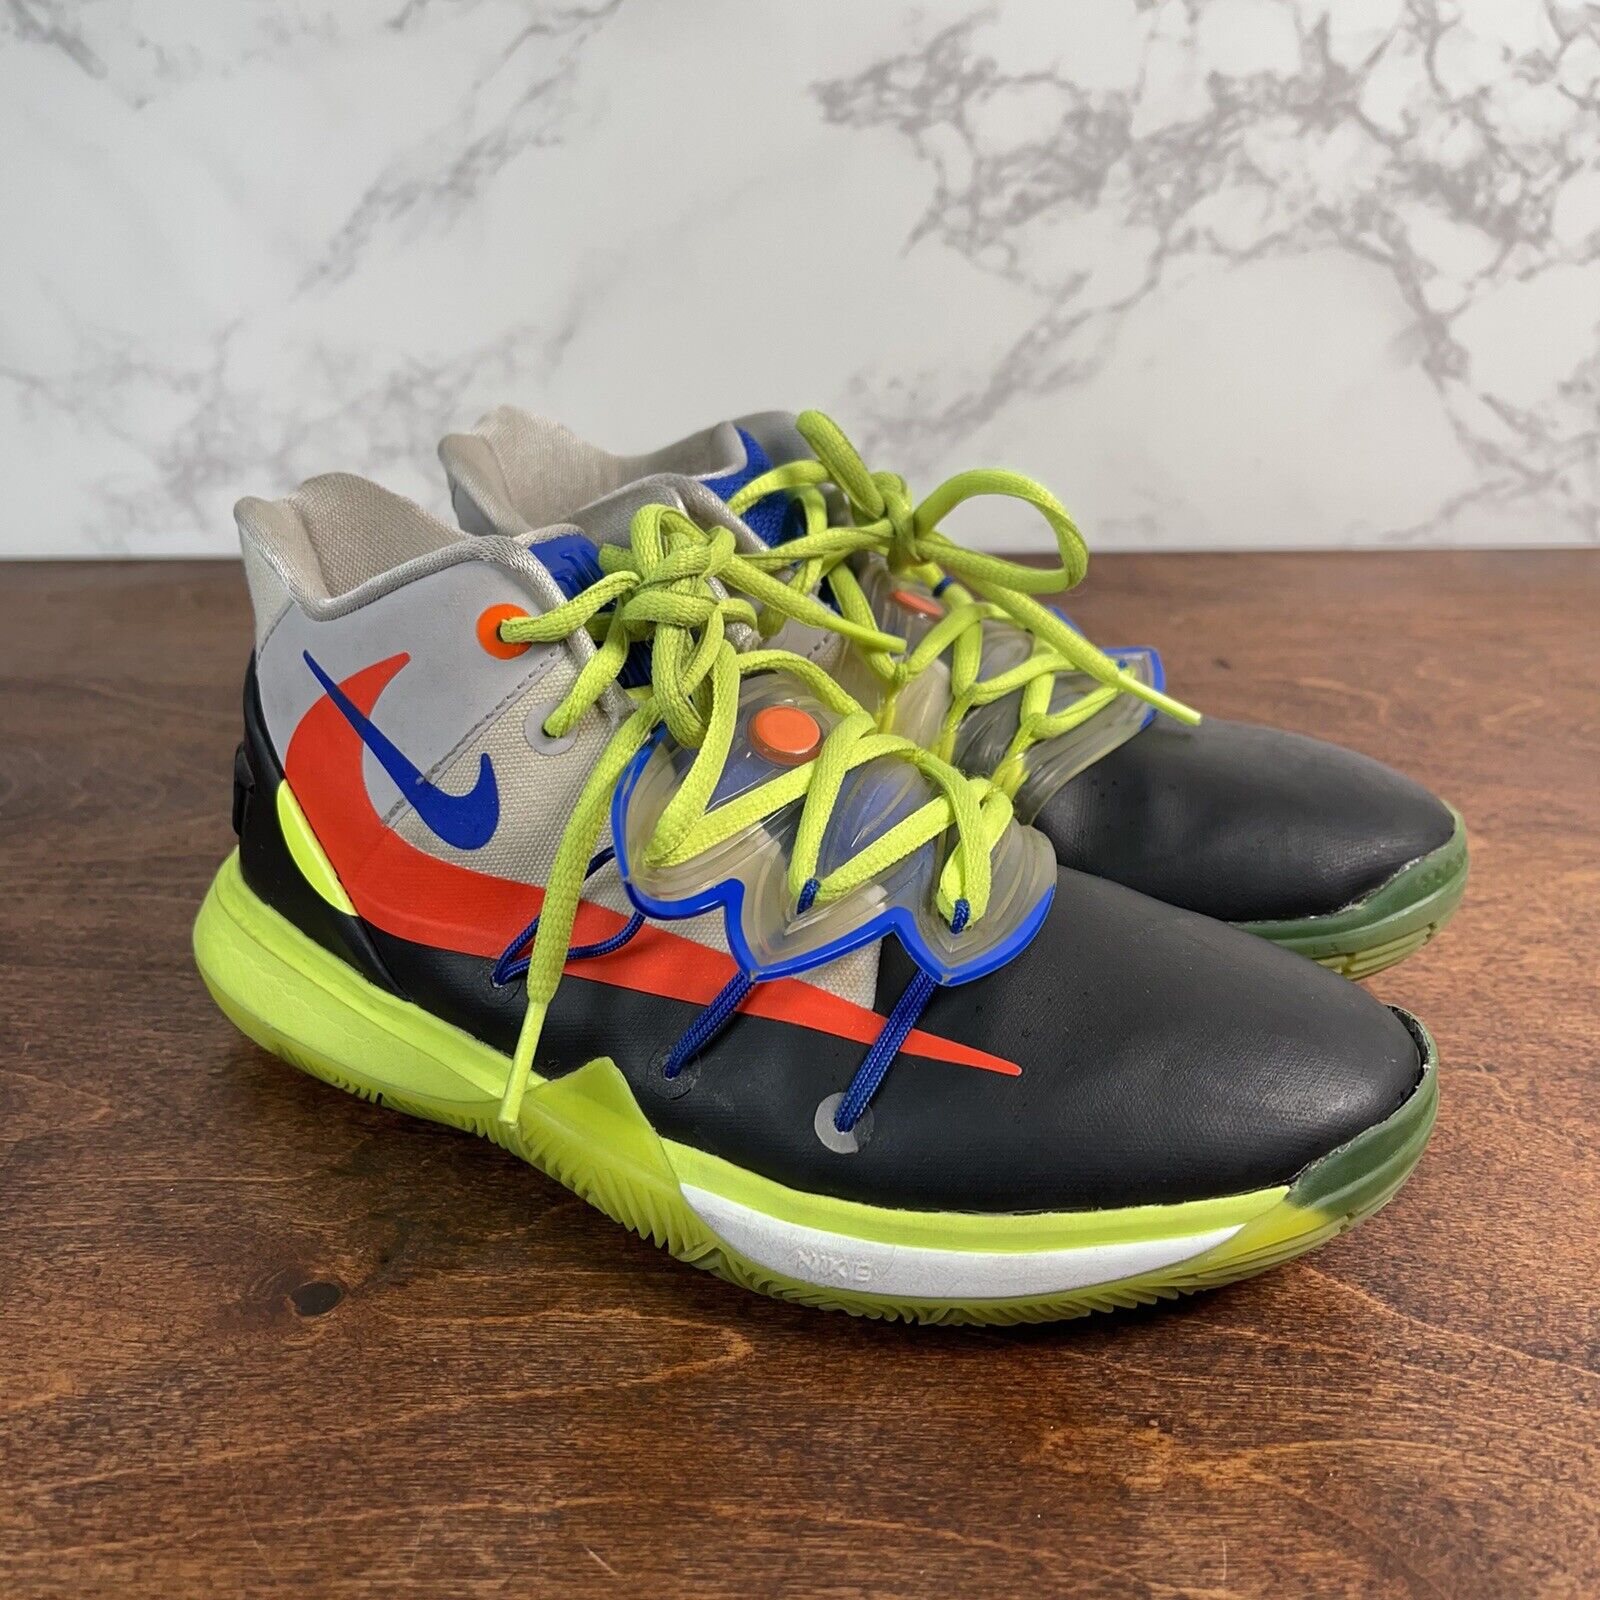 YOUTH Nike Kyrie 5 Rokit All Star Shoes Size 4Y Multicolor Av3837-901